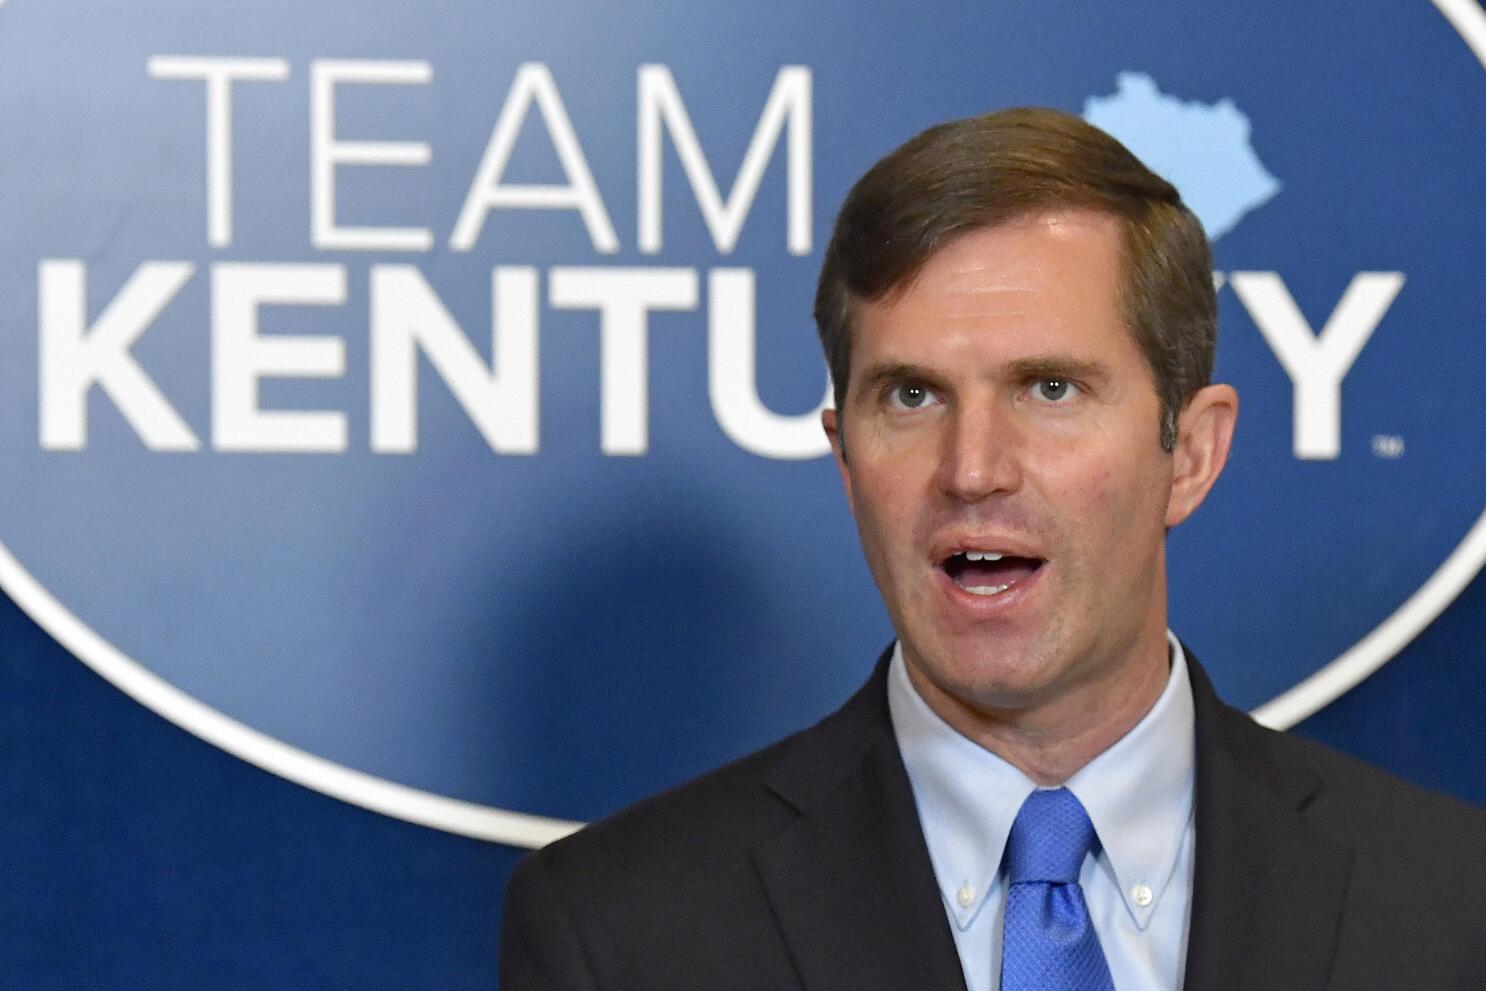 Mask mandate in Kentucky: Gov. Andy Beshear plans to extend again